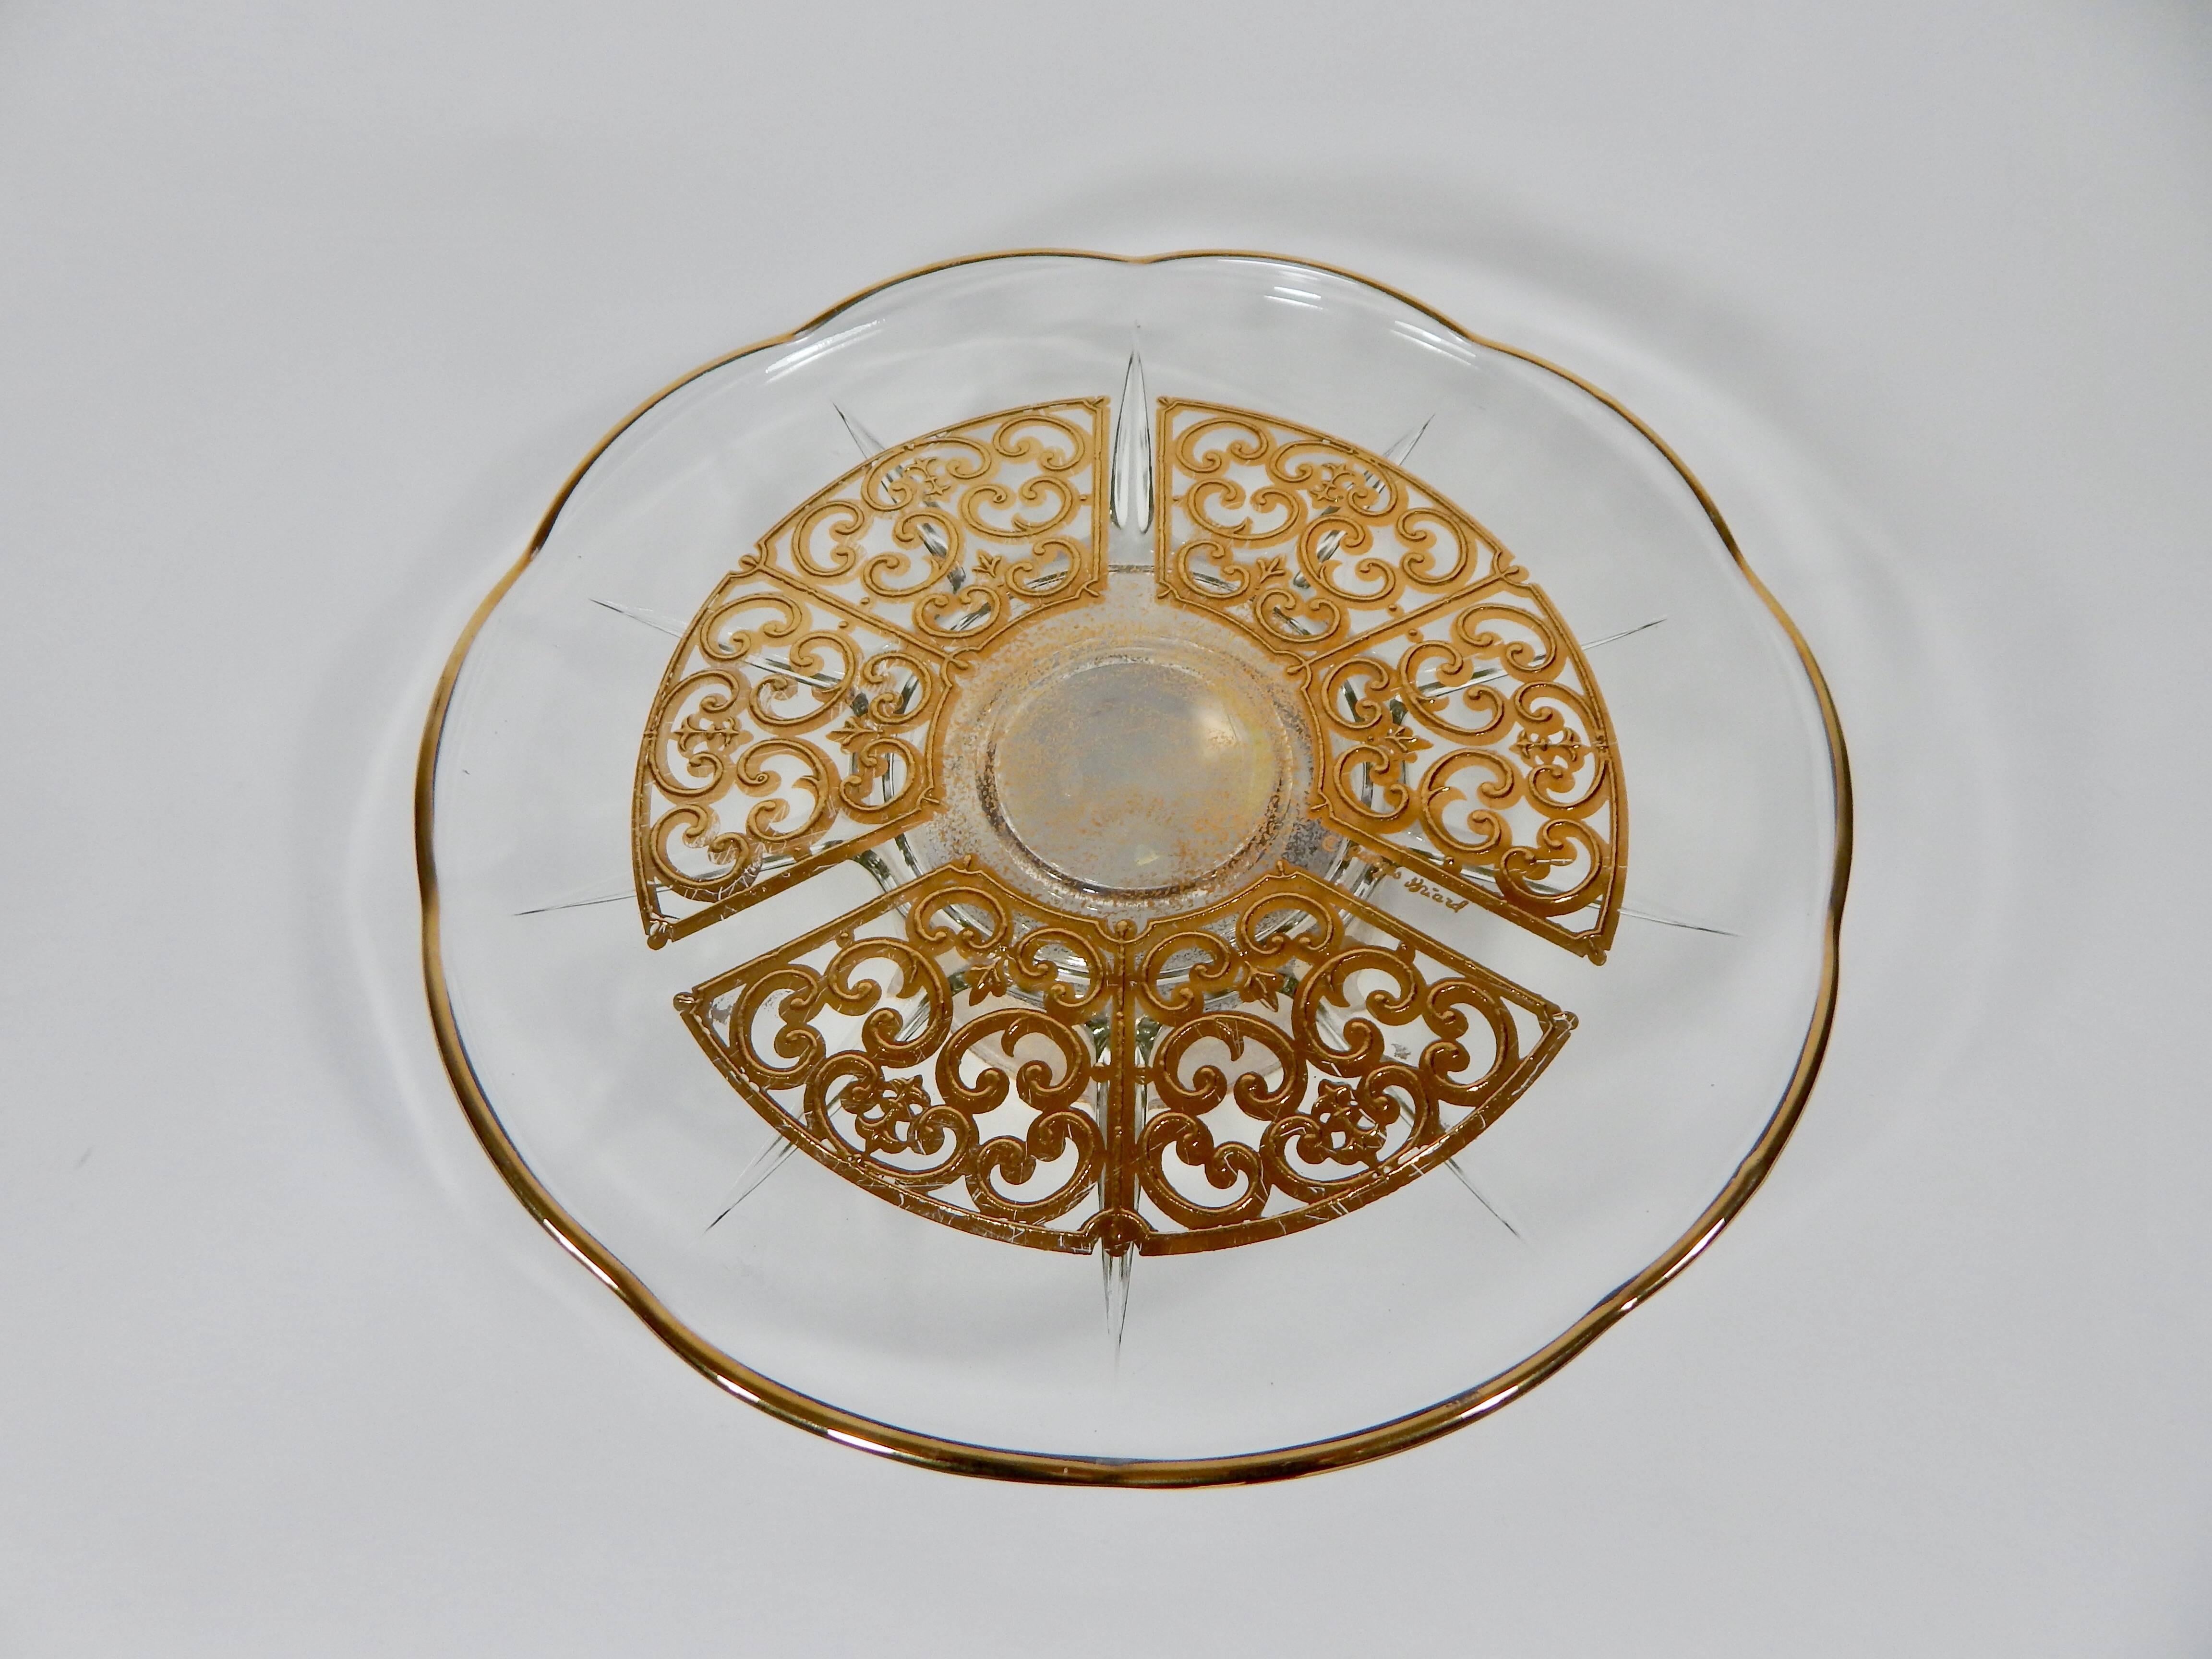 glass and gold cake stand